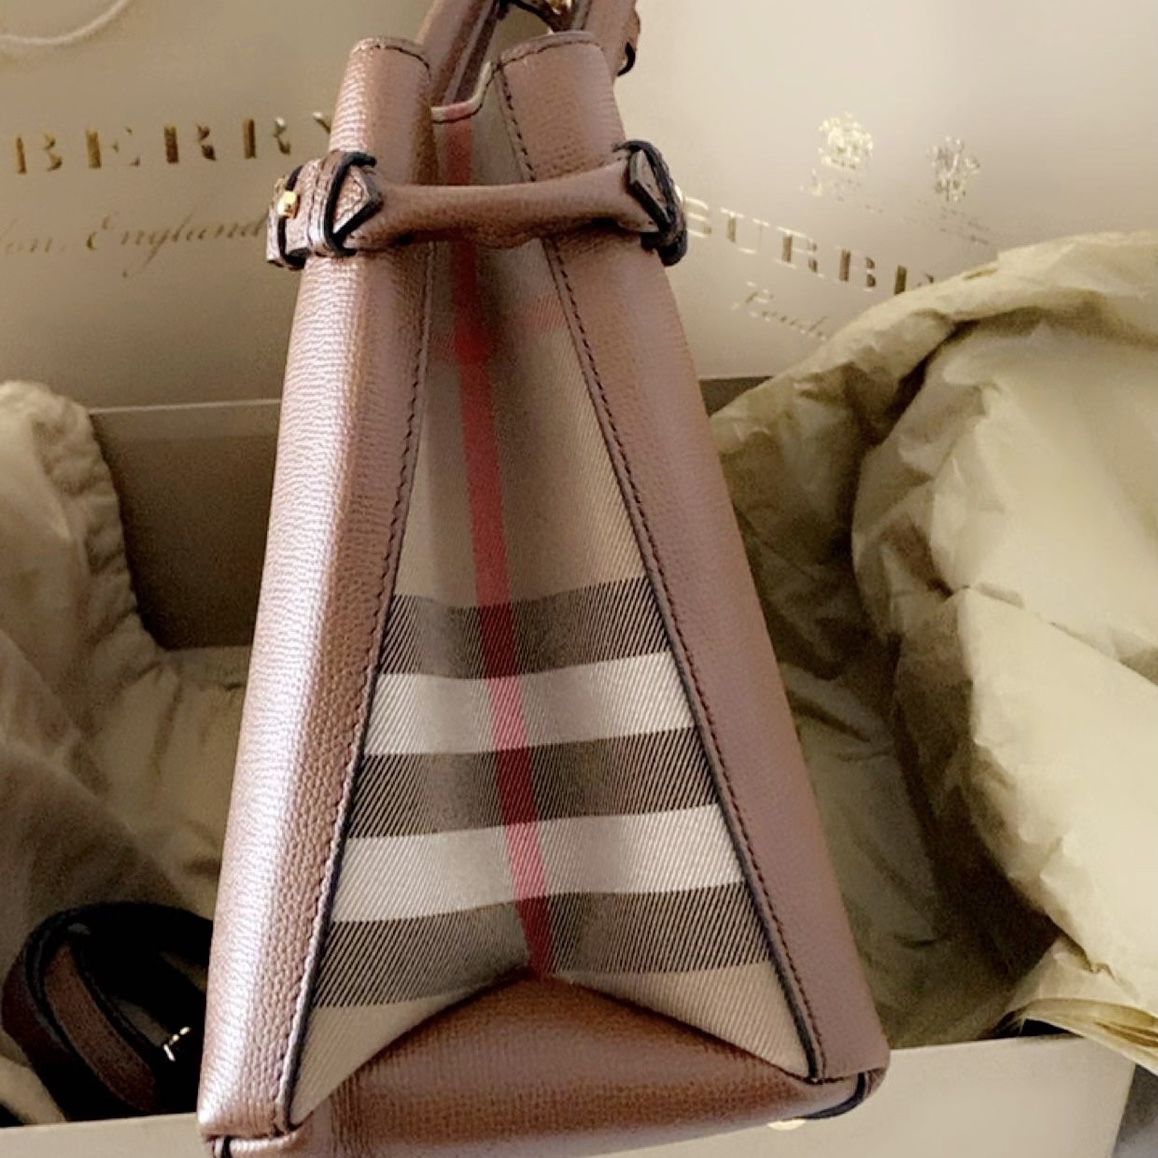 Authentic Burberry Purse for Sale in Rocklin, CA - OfferUp